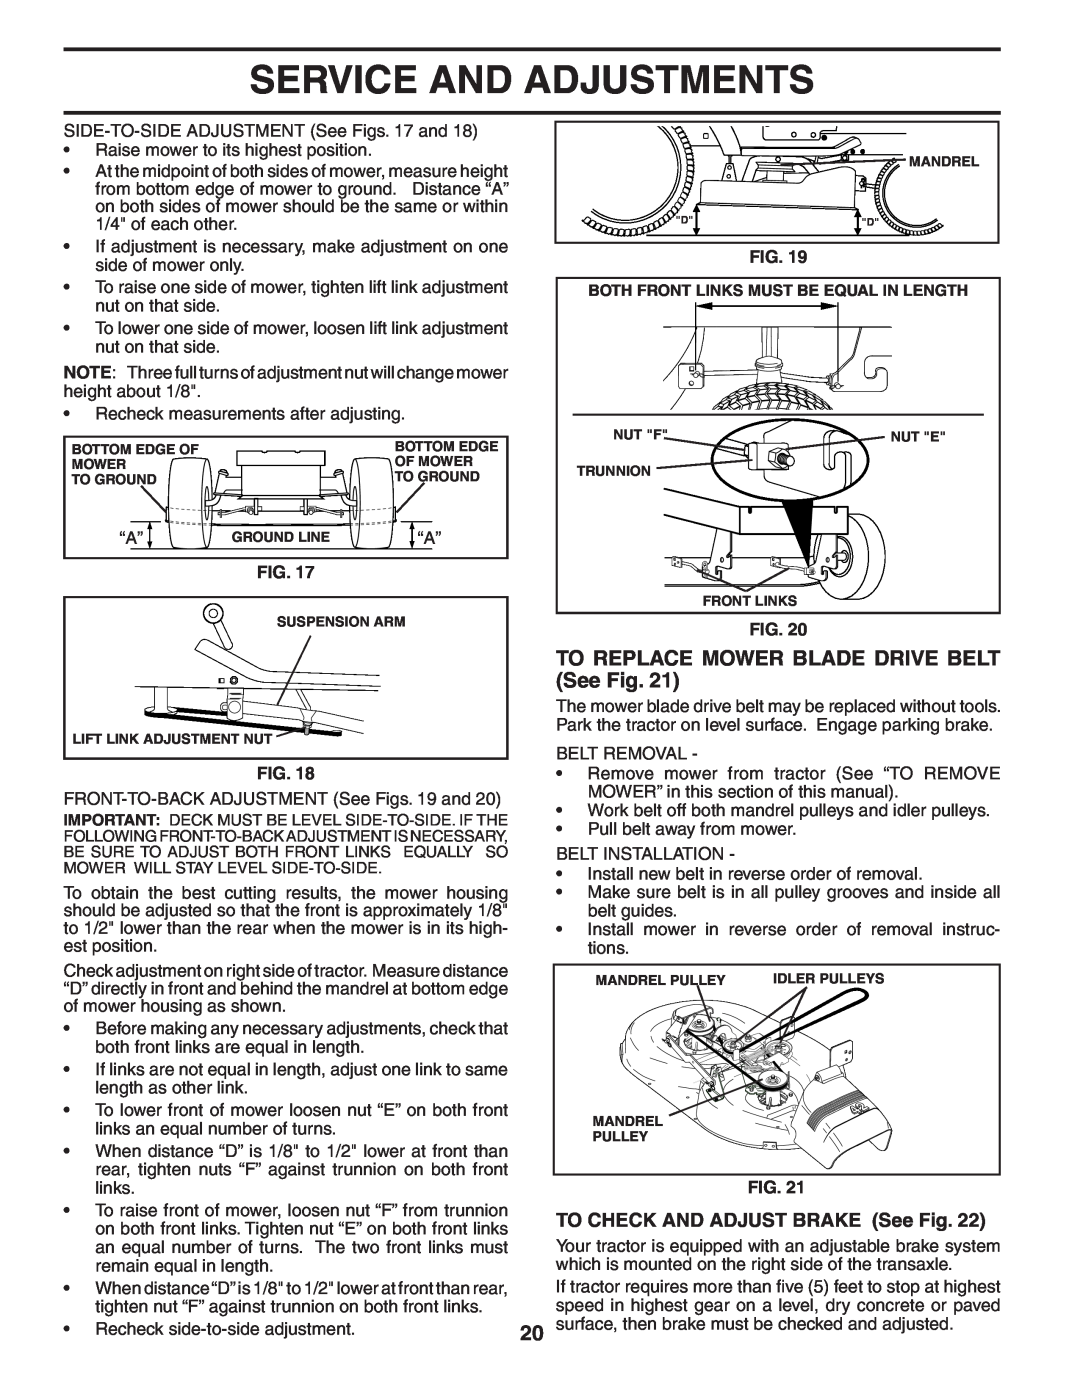 Husqvarna LTH1742 TO REPLACE MOWER BLADE DRIVE BELT See Fig, Service And Adjustments, TO CHECK AND ADJUST BRAKE See Fig 